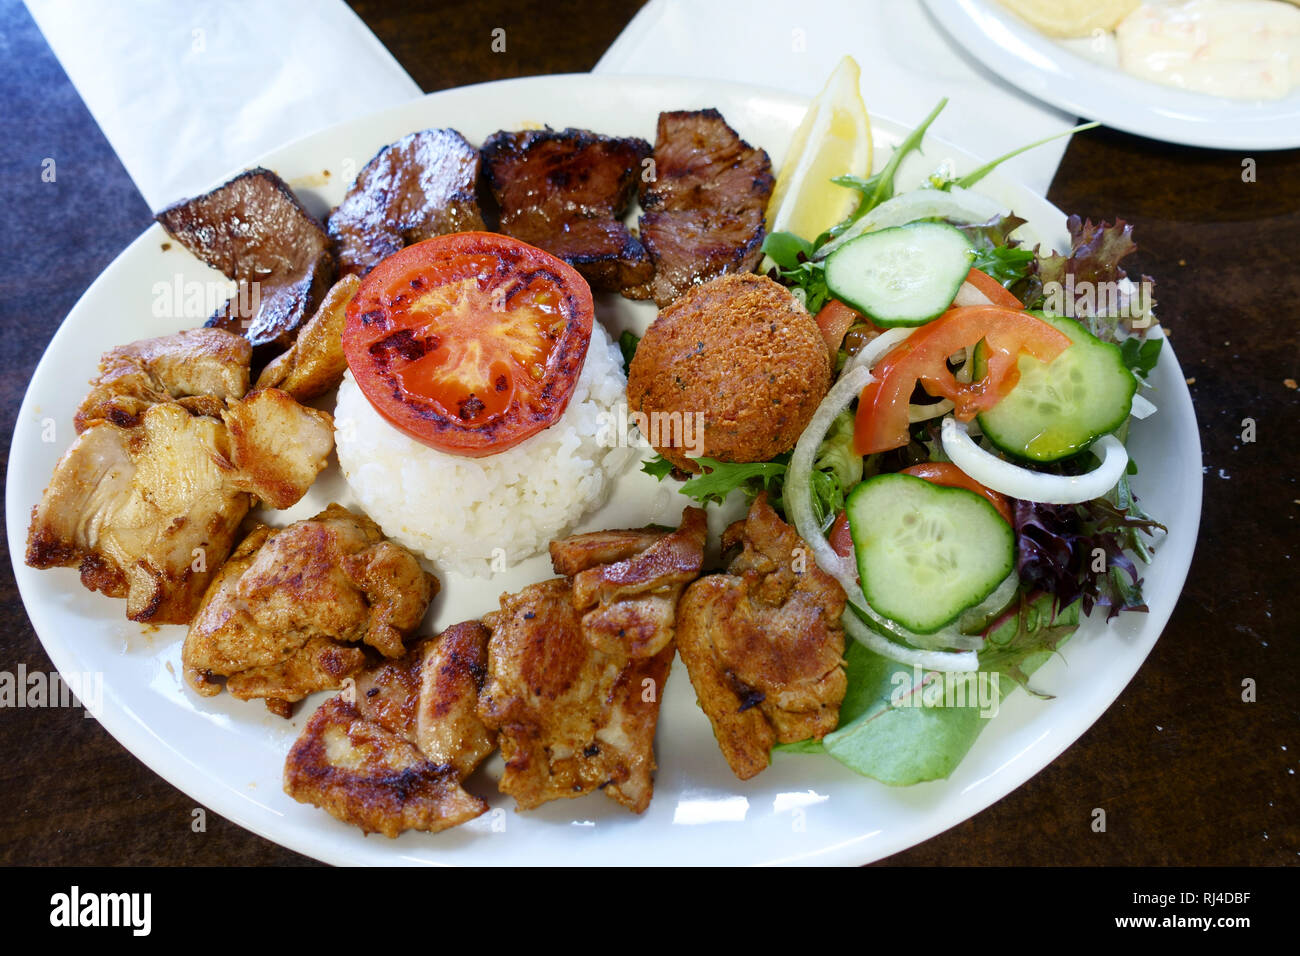 A plate of grilled chicken, lamb served with white rice and fresh salad Stock Photo